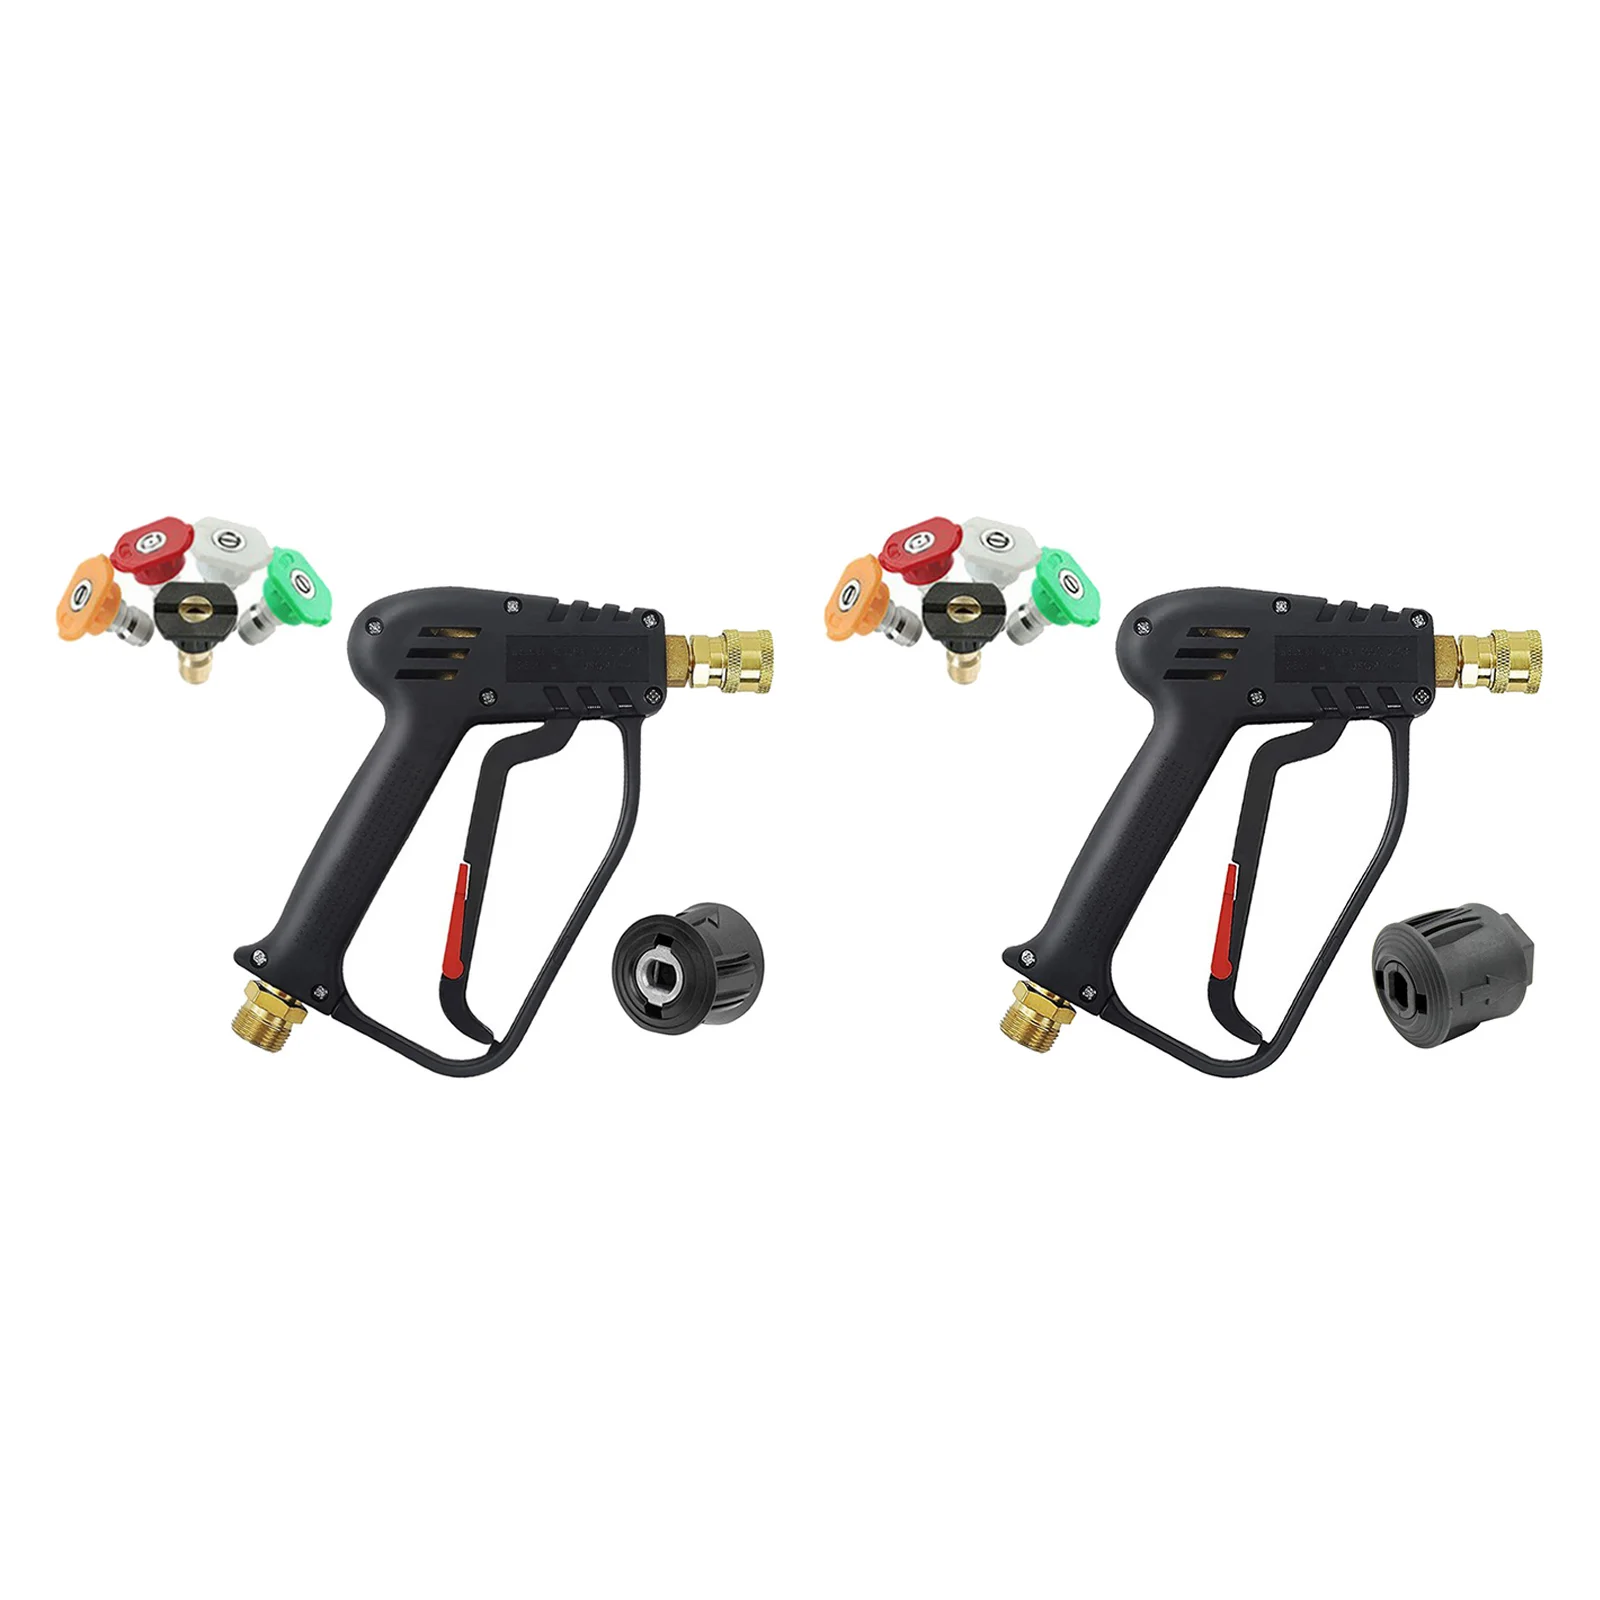 Professional Pressure Washer Gun Quick Connector for Nilfisk Hose Car Washer